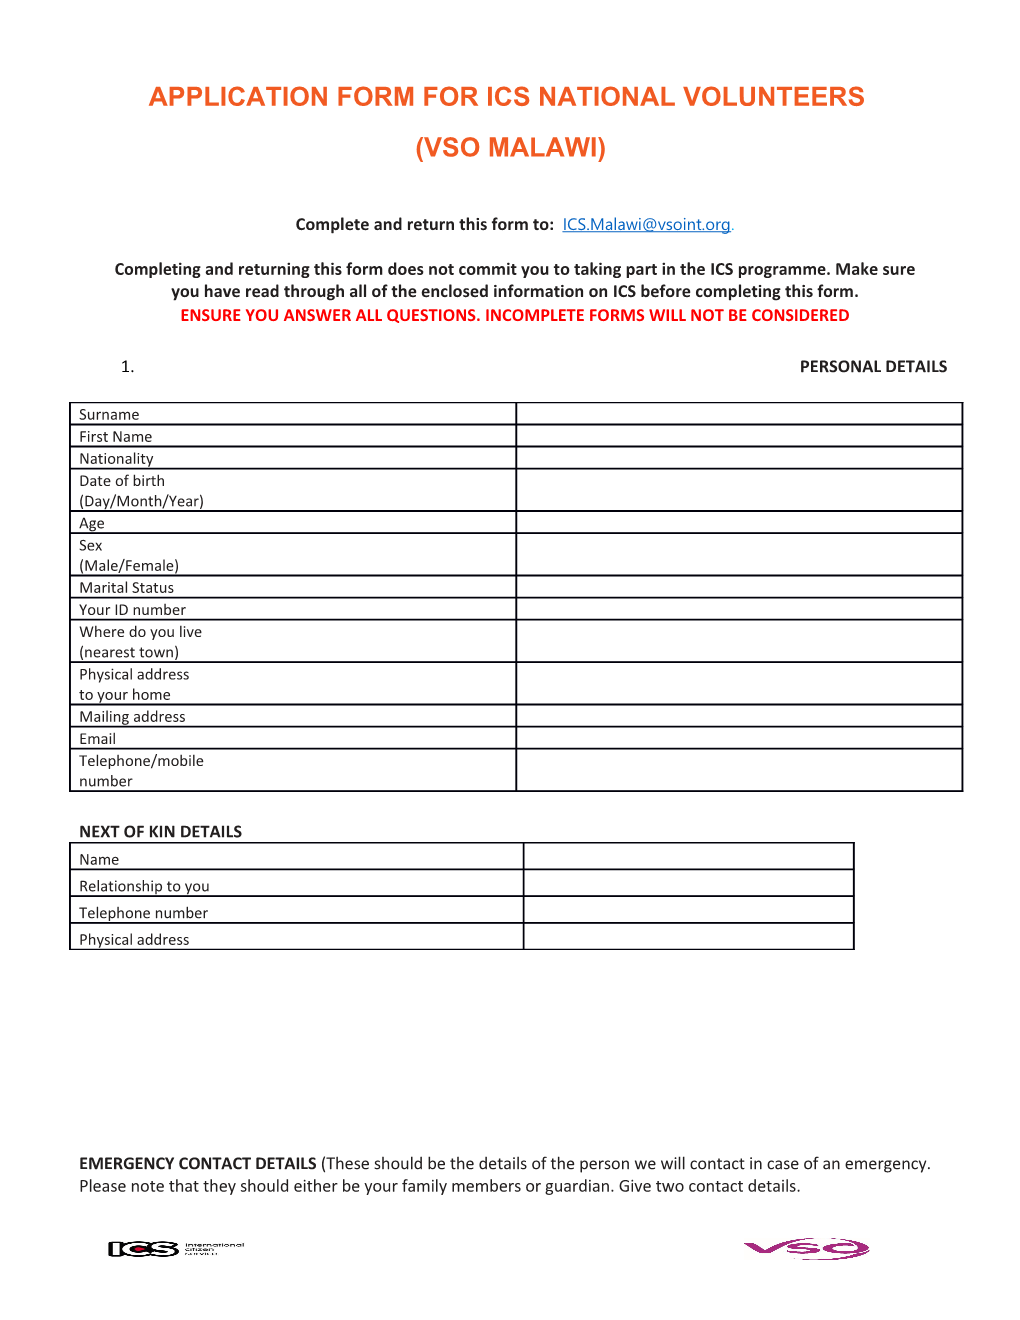 Application Form for Ics National Volunteers